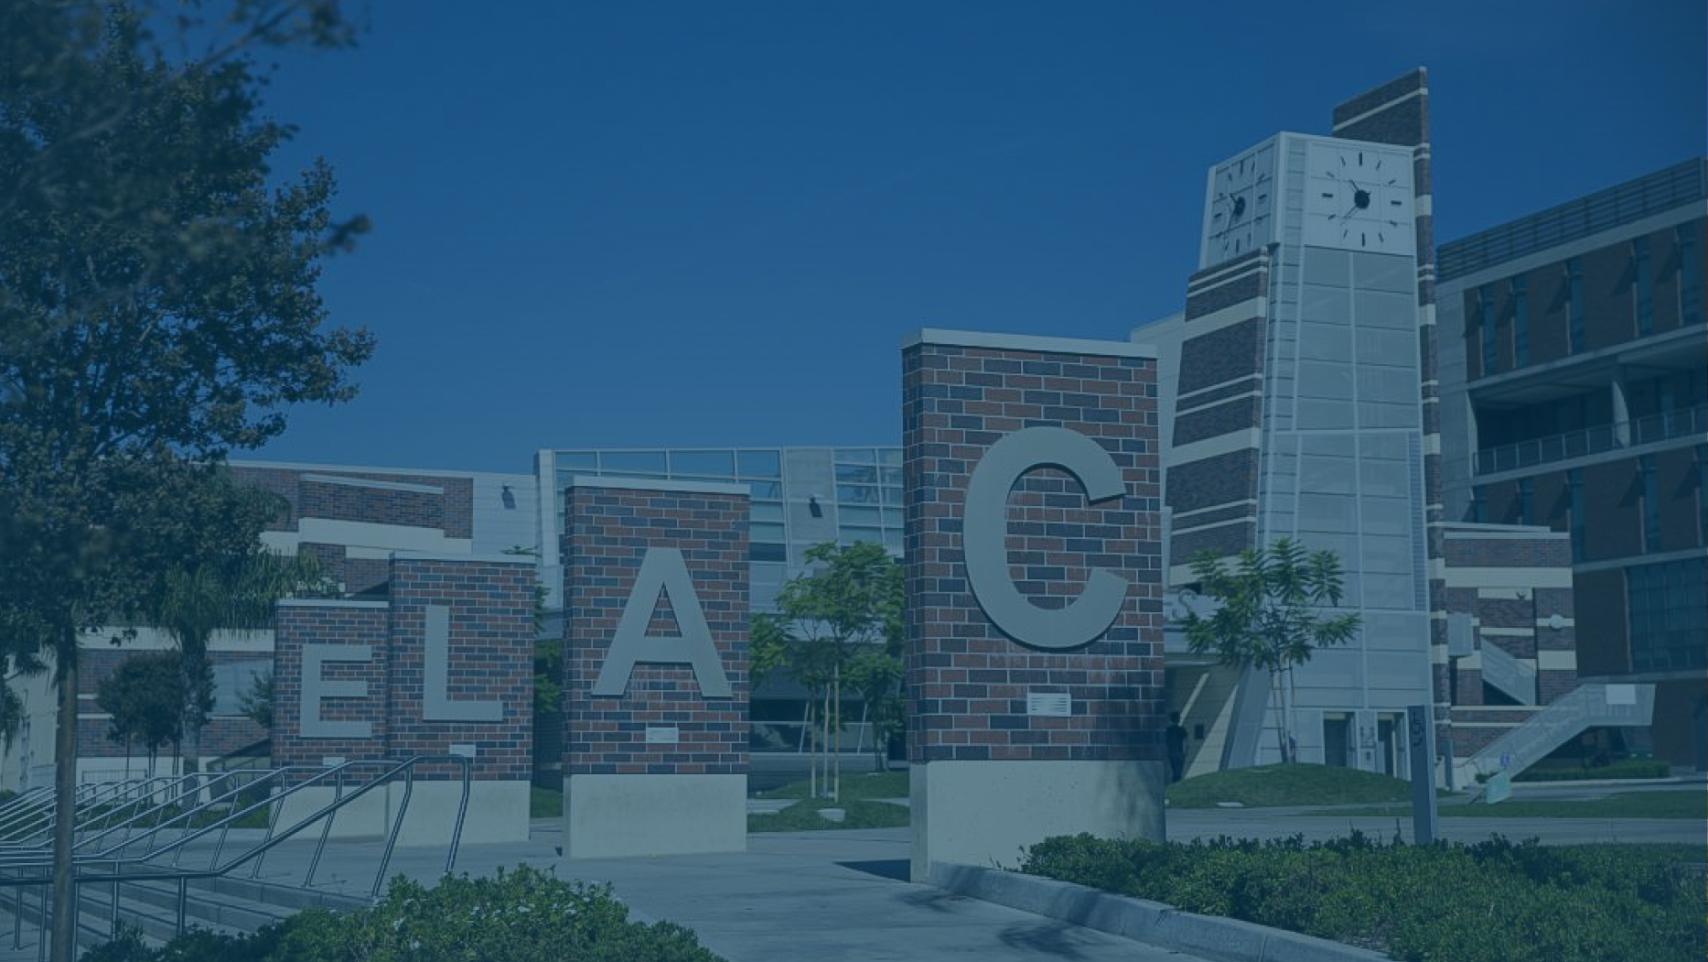 Letter signs spell "ELAC" on a college campus.